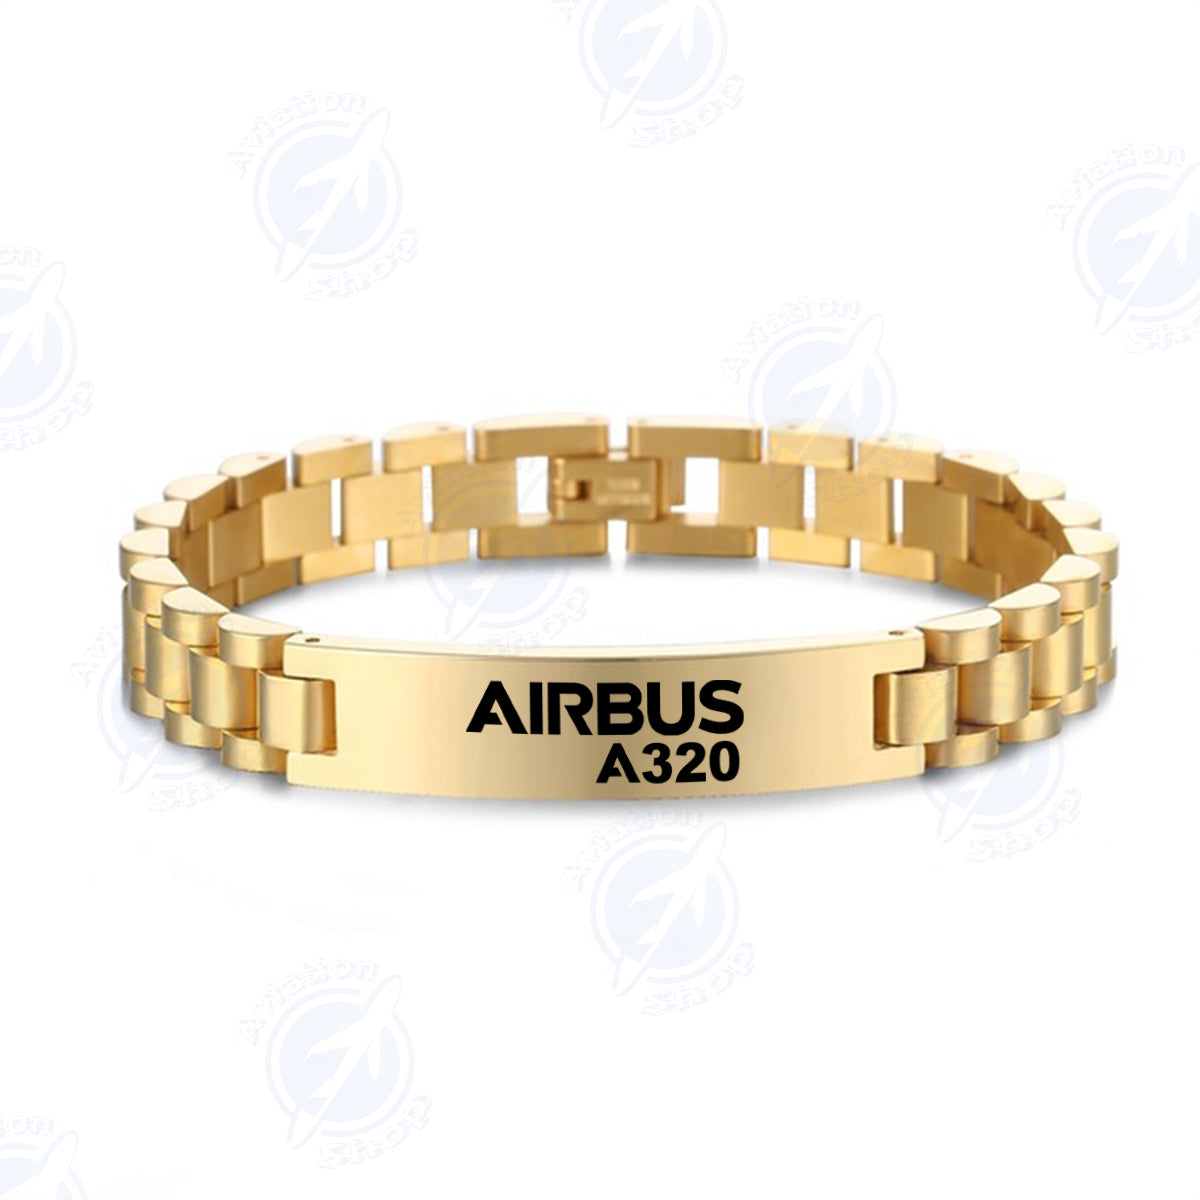 Airbus A320 & Text Designed Stainless Steel Chain Bracelets